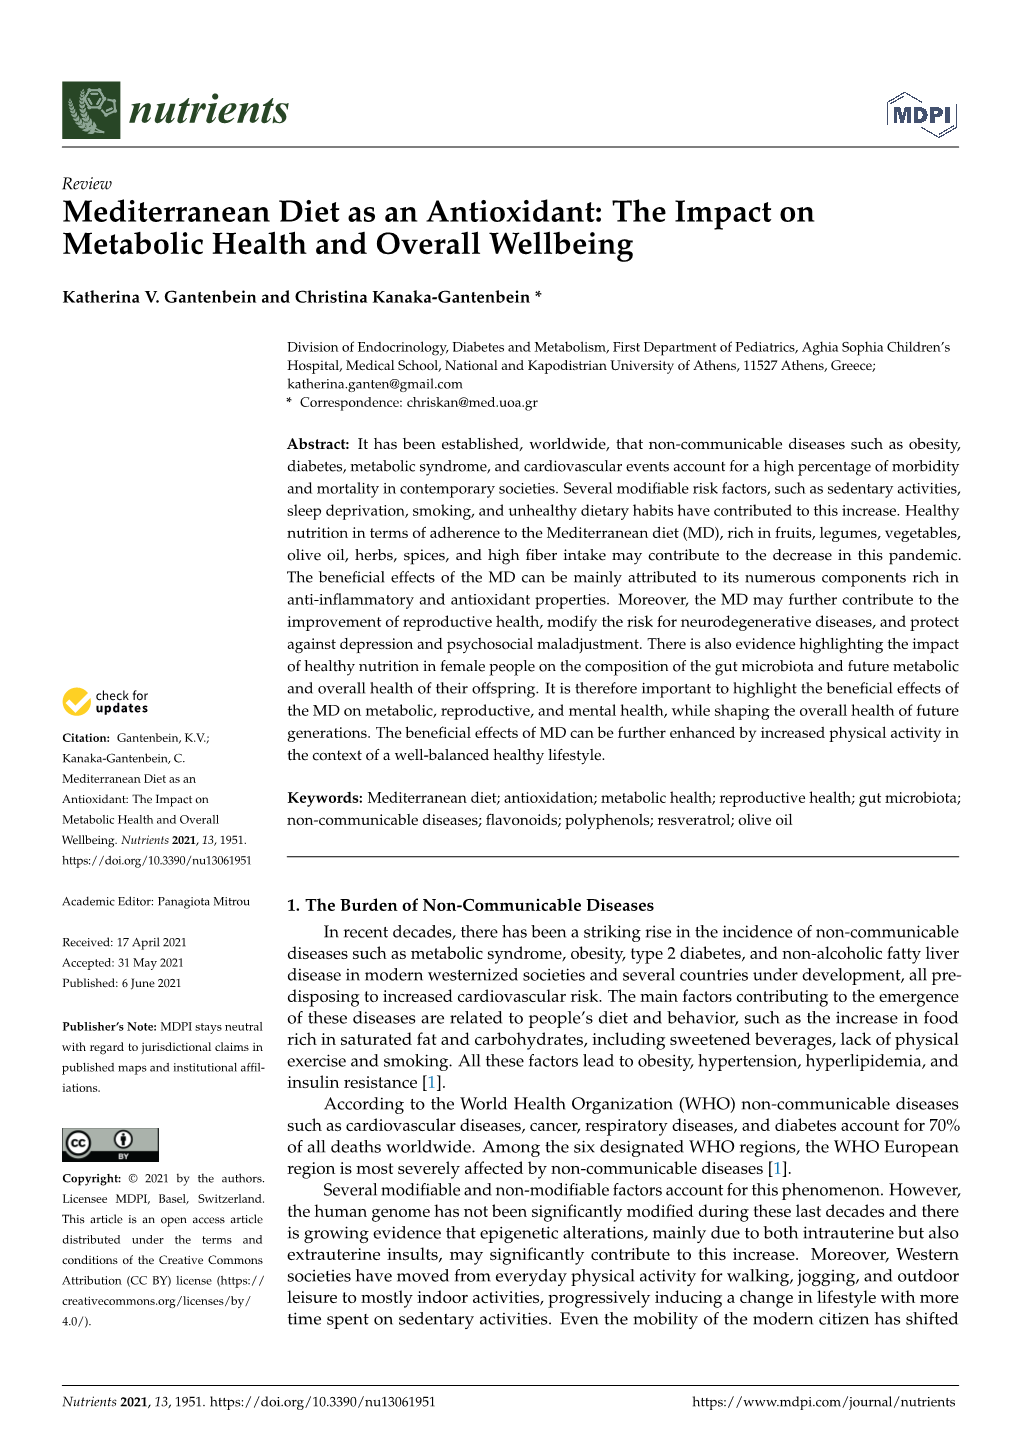 Mediterranean Diet As an Antioxidant: the Impact on Metabolic Health and Overall Wellbeing